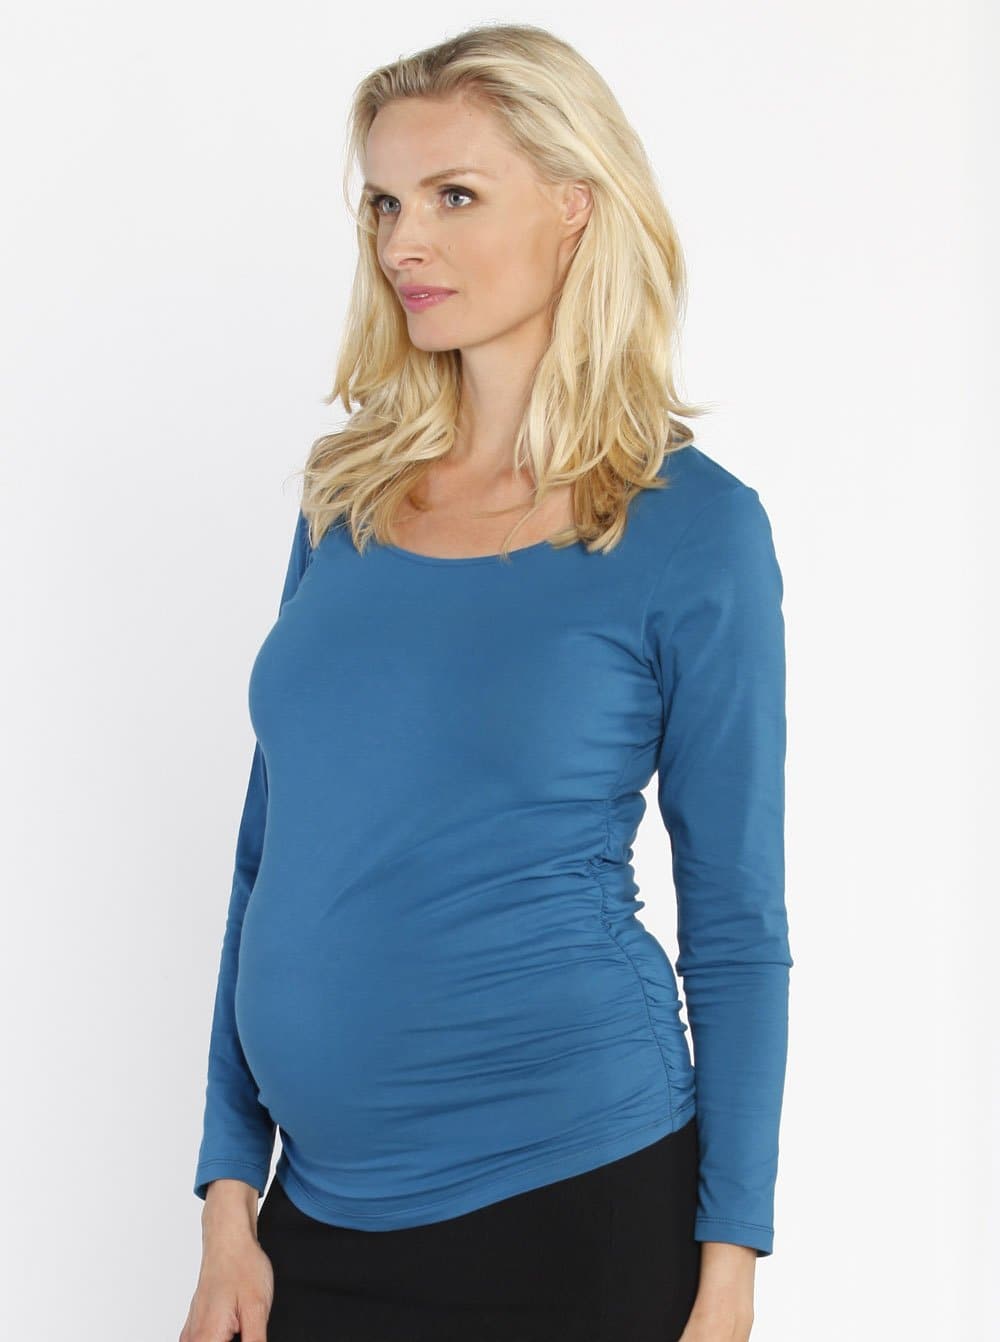 Maternity Long Sleeve Cotton Tee - Blue Teal - Angel Maternity - Maternity clothes - shop online (771946119271)